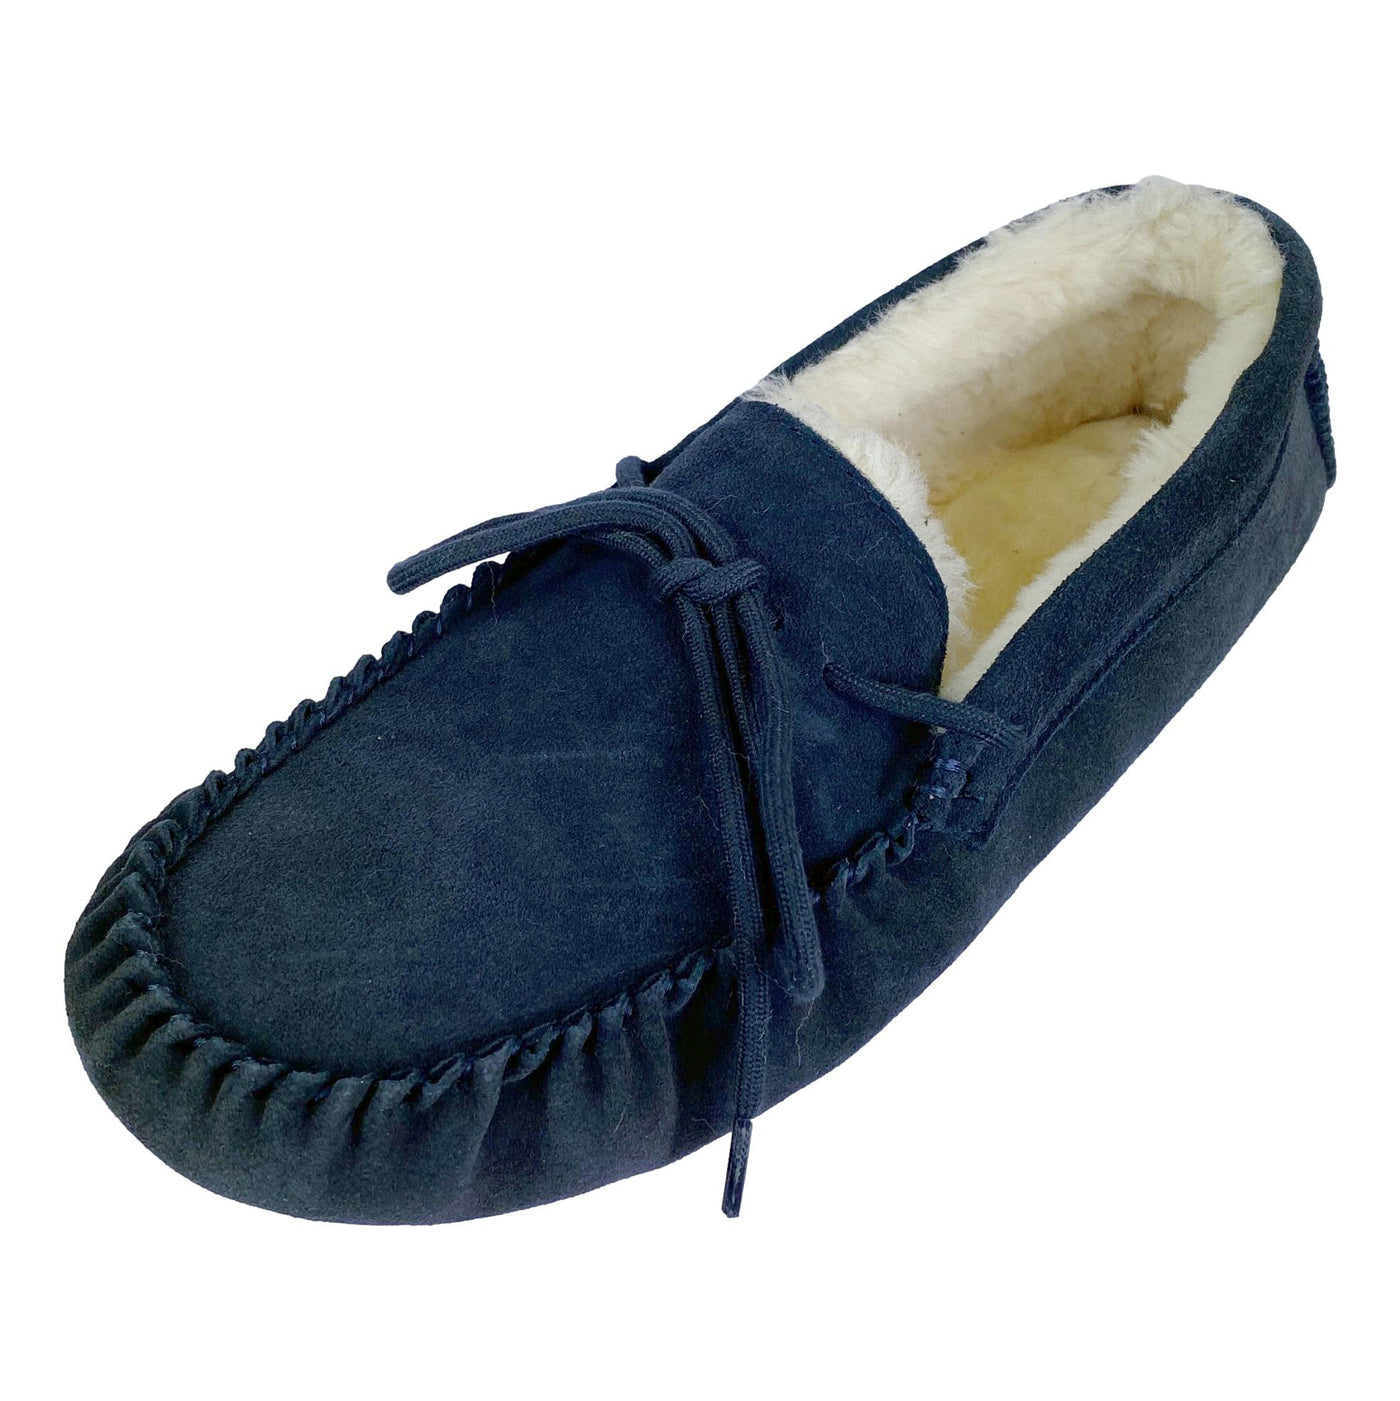 Deluxe Mens 'Leo' Lambswool Moccasin Slippers with Hard Sole - Navy